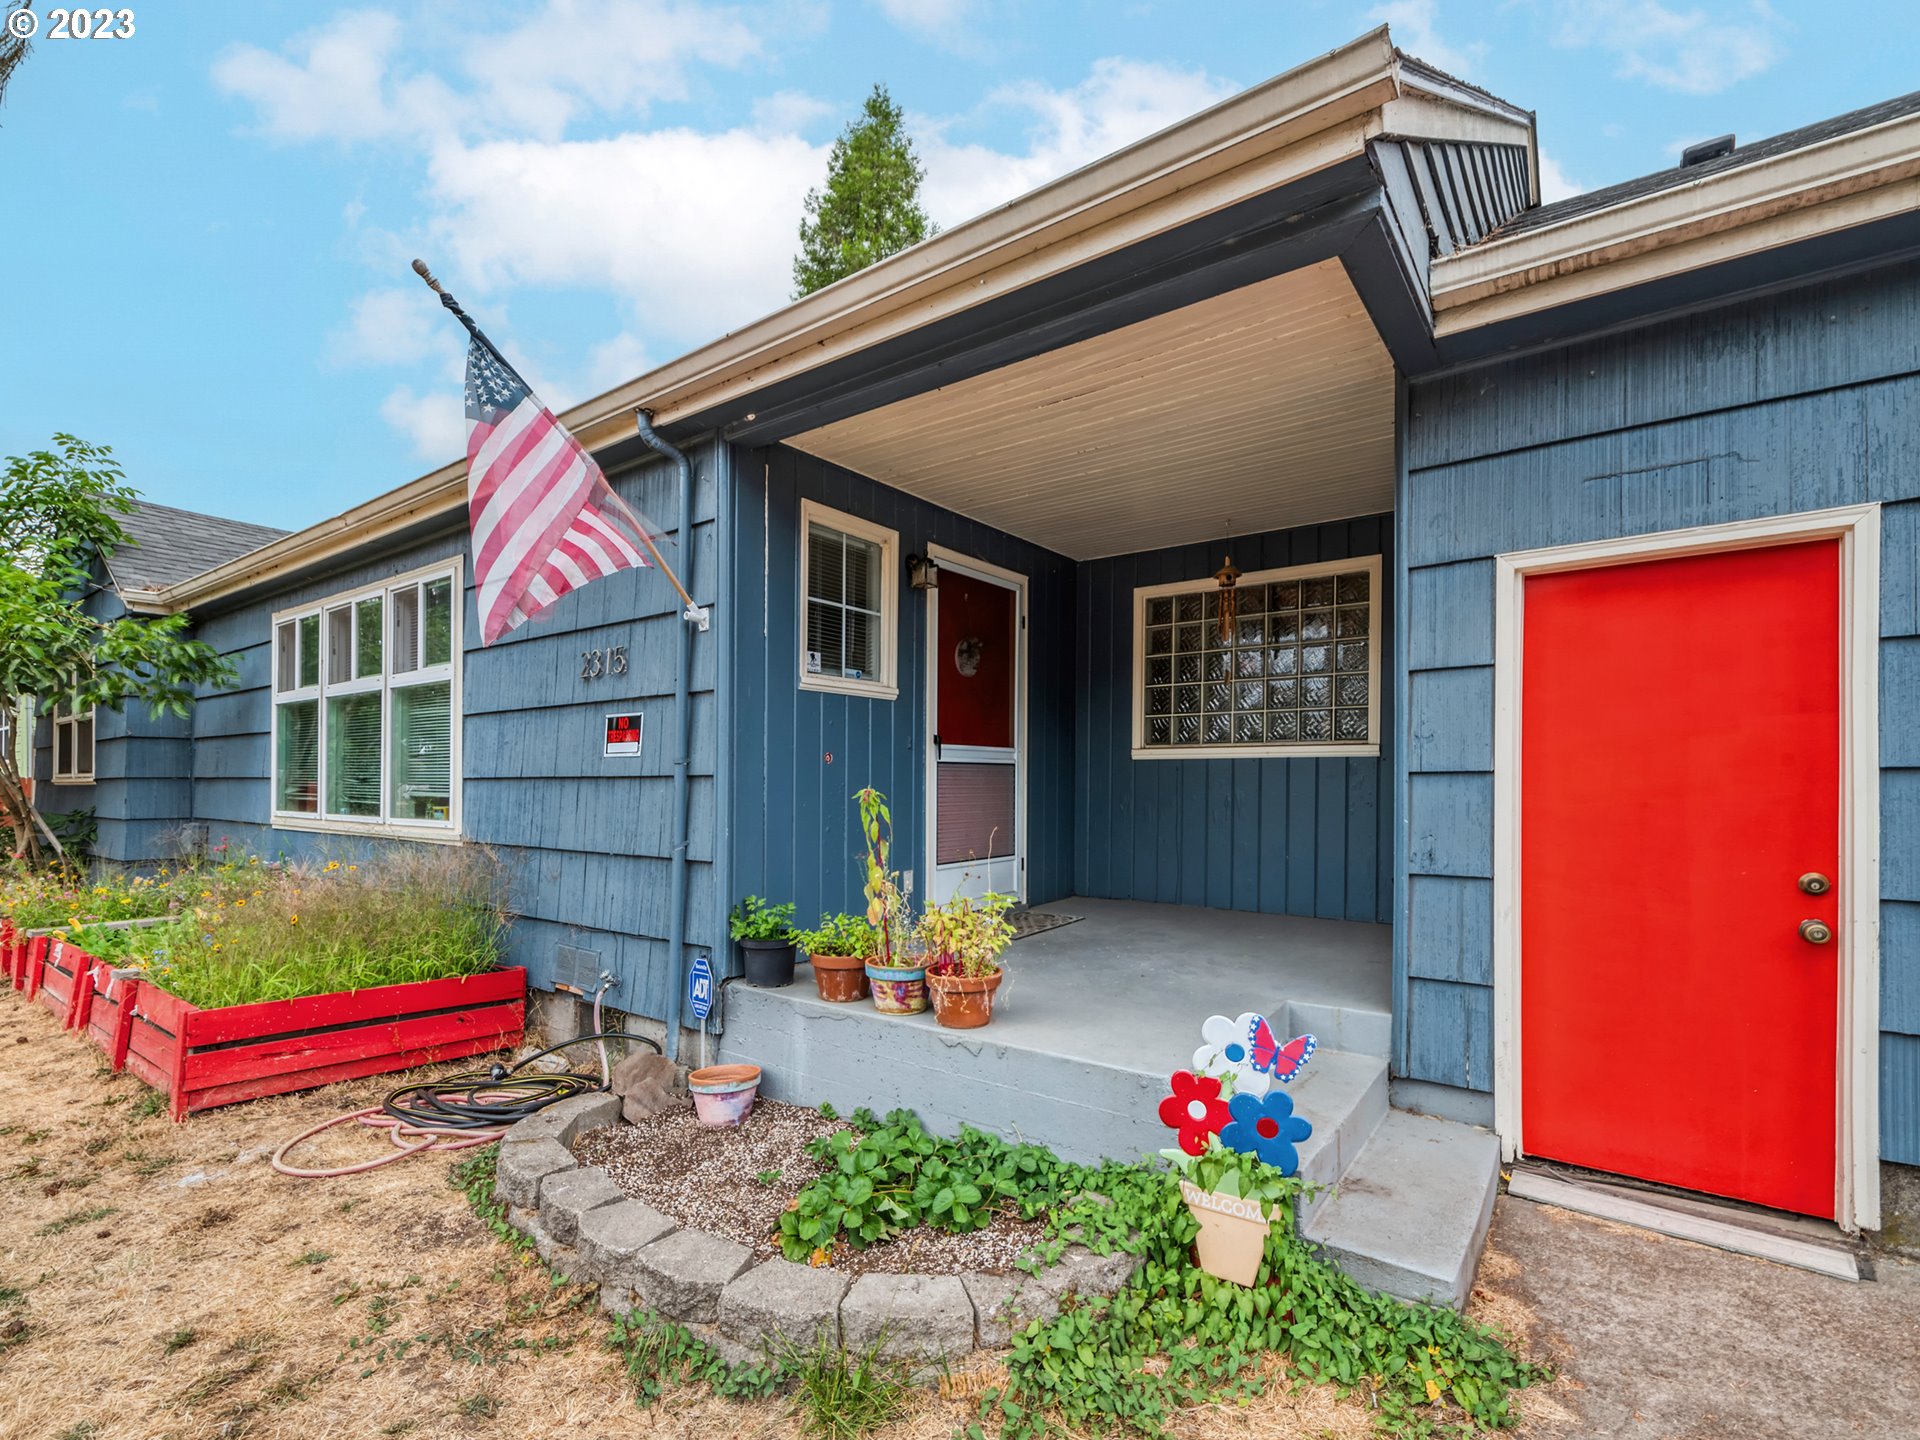 Potential, potential, potential! This 1,527 SF ranch could be so many things to so many different people. Sitting on a 0.34 acre corner lot with C-2 Zoning, the opportunities are endless. As you enter the home you'll fall in love with both the refinished wood floors from a 2018 remodel as well as the separation of space. In the center of the home is the living room, kitchen and dining area. At one end you will find two generously sized bedrooms and a full bathroom with updated bathroom vanity and light fixtures. At the other end is the third bedroom, half bath, laundry room and access to the massive two-car garage and attached shop. Outside, you will notice a brand new roof as of 2023, a fully fenced in yard, electrical hookups for RV parking or food carts, as well as how perfectly the home is situated on the lot, with tons of space front, back and side to expand and take advantage of the unique C-2 zoning of this property. The live/work or work/work flexibility of this property givens its C-2 zoning are sure to appeal to the business owner or entrepreneur. Permitted uses within the zone include general office, day care, storage facility, e-commerce distribution facility, manufacturing facility, or multifamily redevelopment. Buyer to verify appropriate zoning. Visibility on both Roosevelt Blvd. and Bethel Dr. present awesome signage opportunities as well easy access to HWY 99, River Road, and HWY 126.